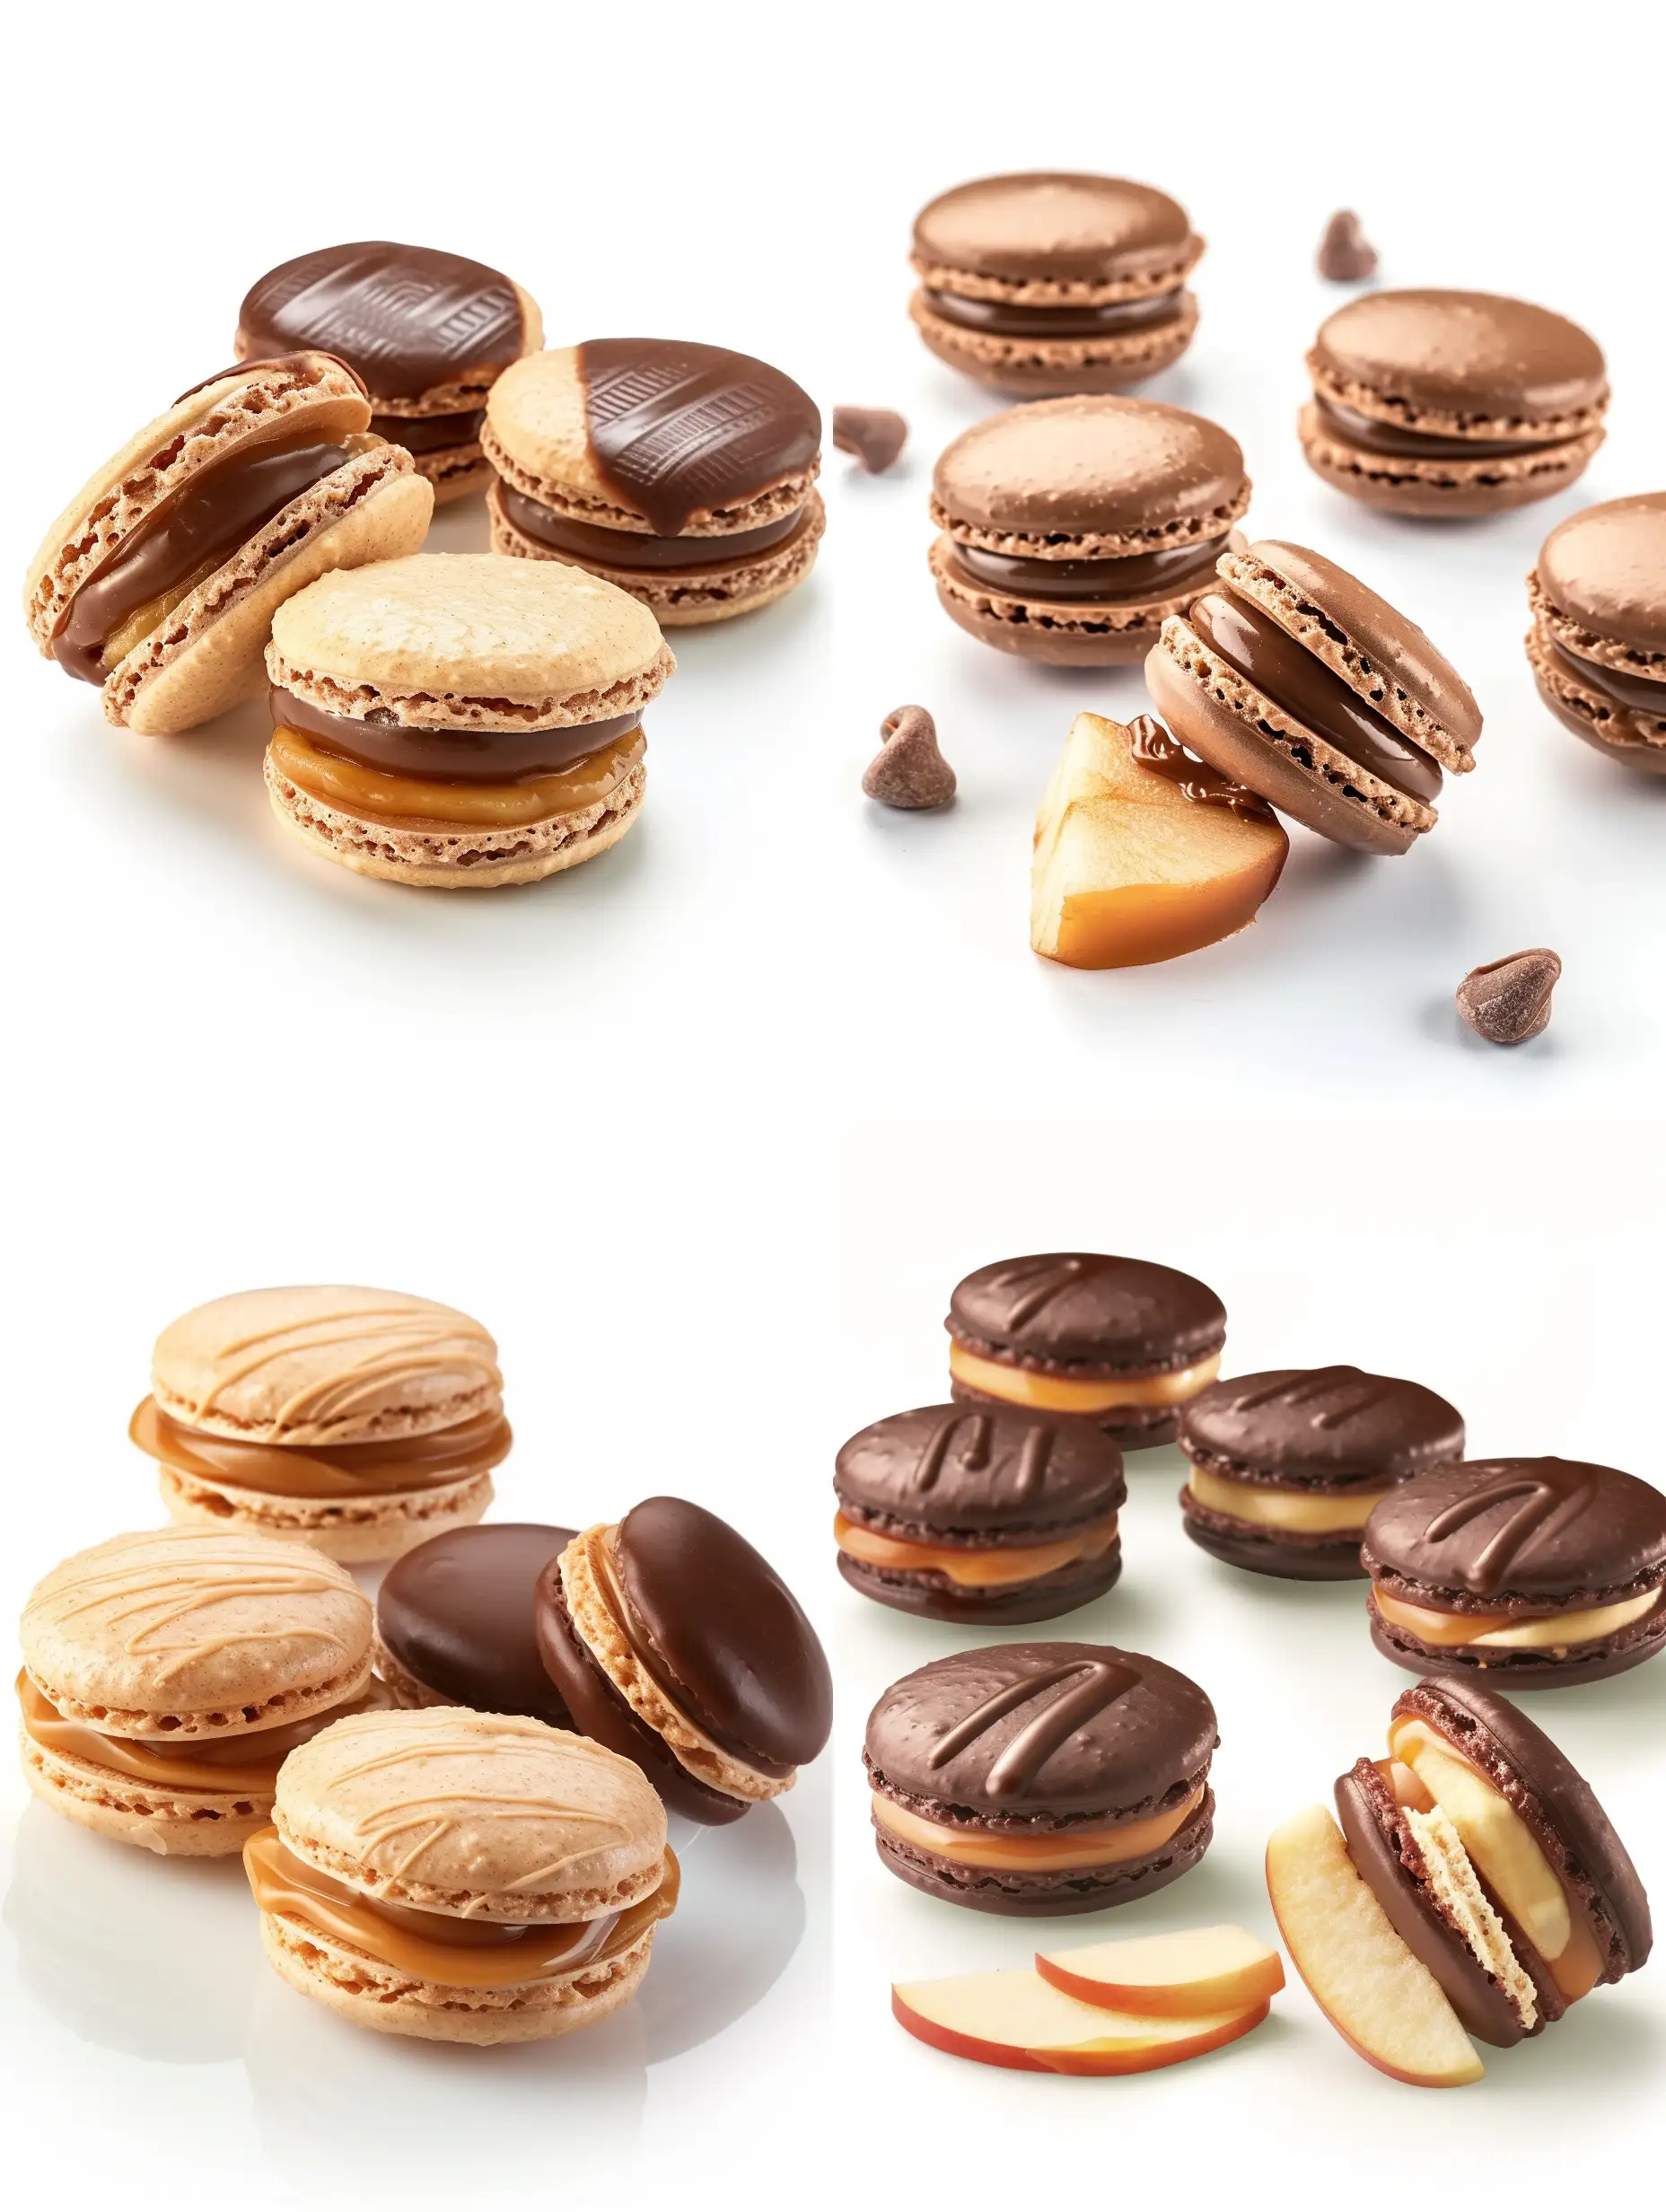 Macaroon, apple and caramel chocolate flavor, several pieces, super realistic, no blur